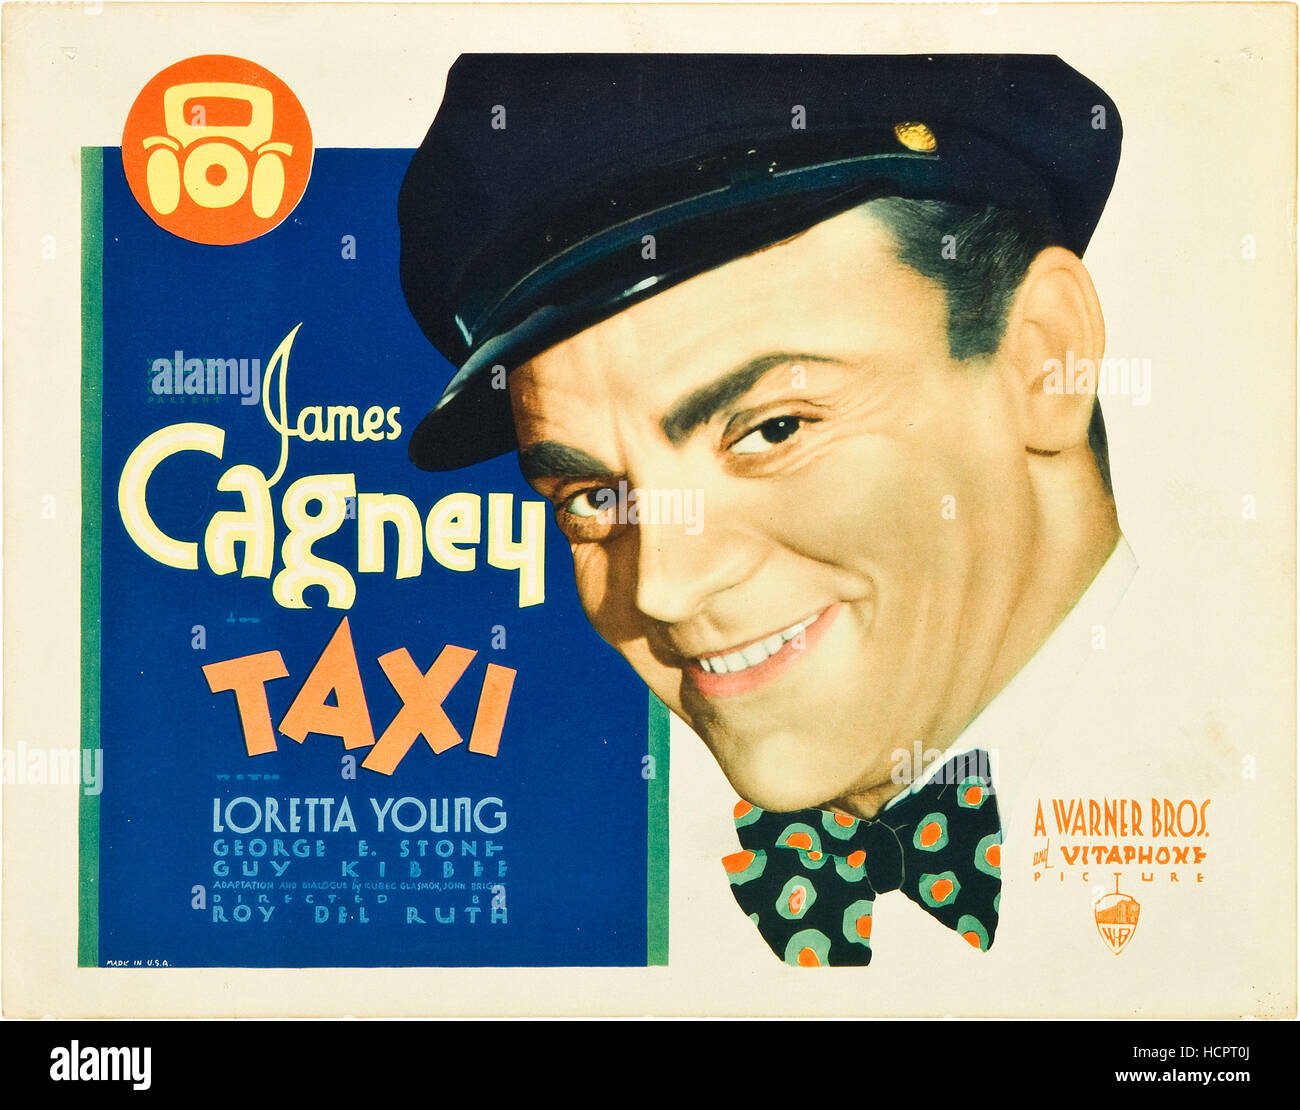 TAXI, James Cagney, 1932. Stock Photo